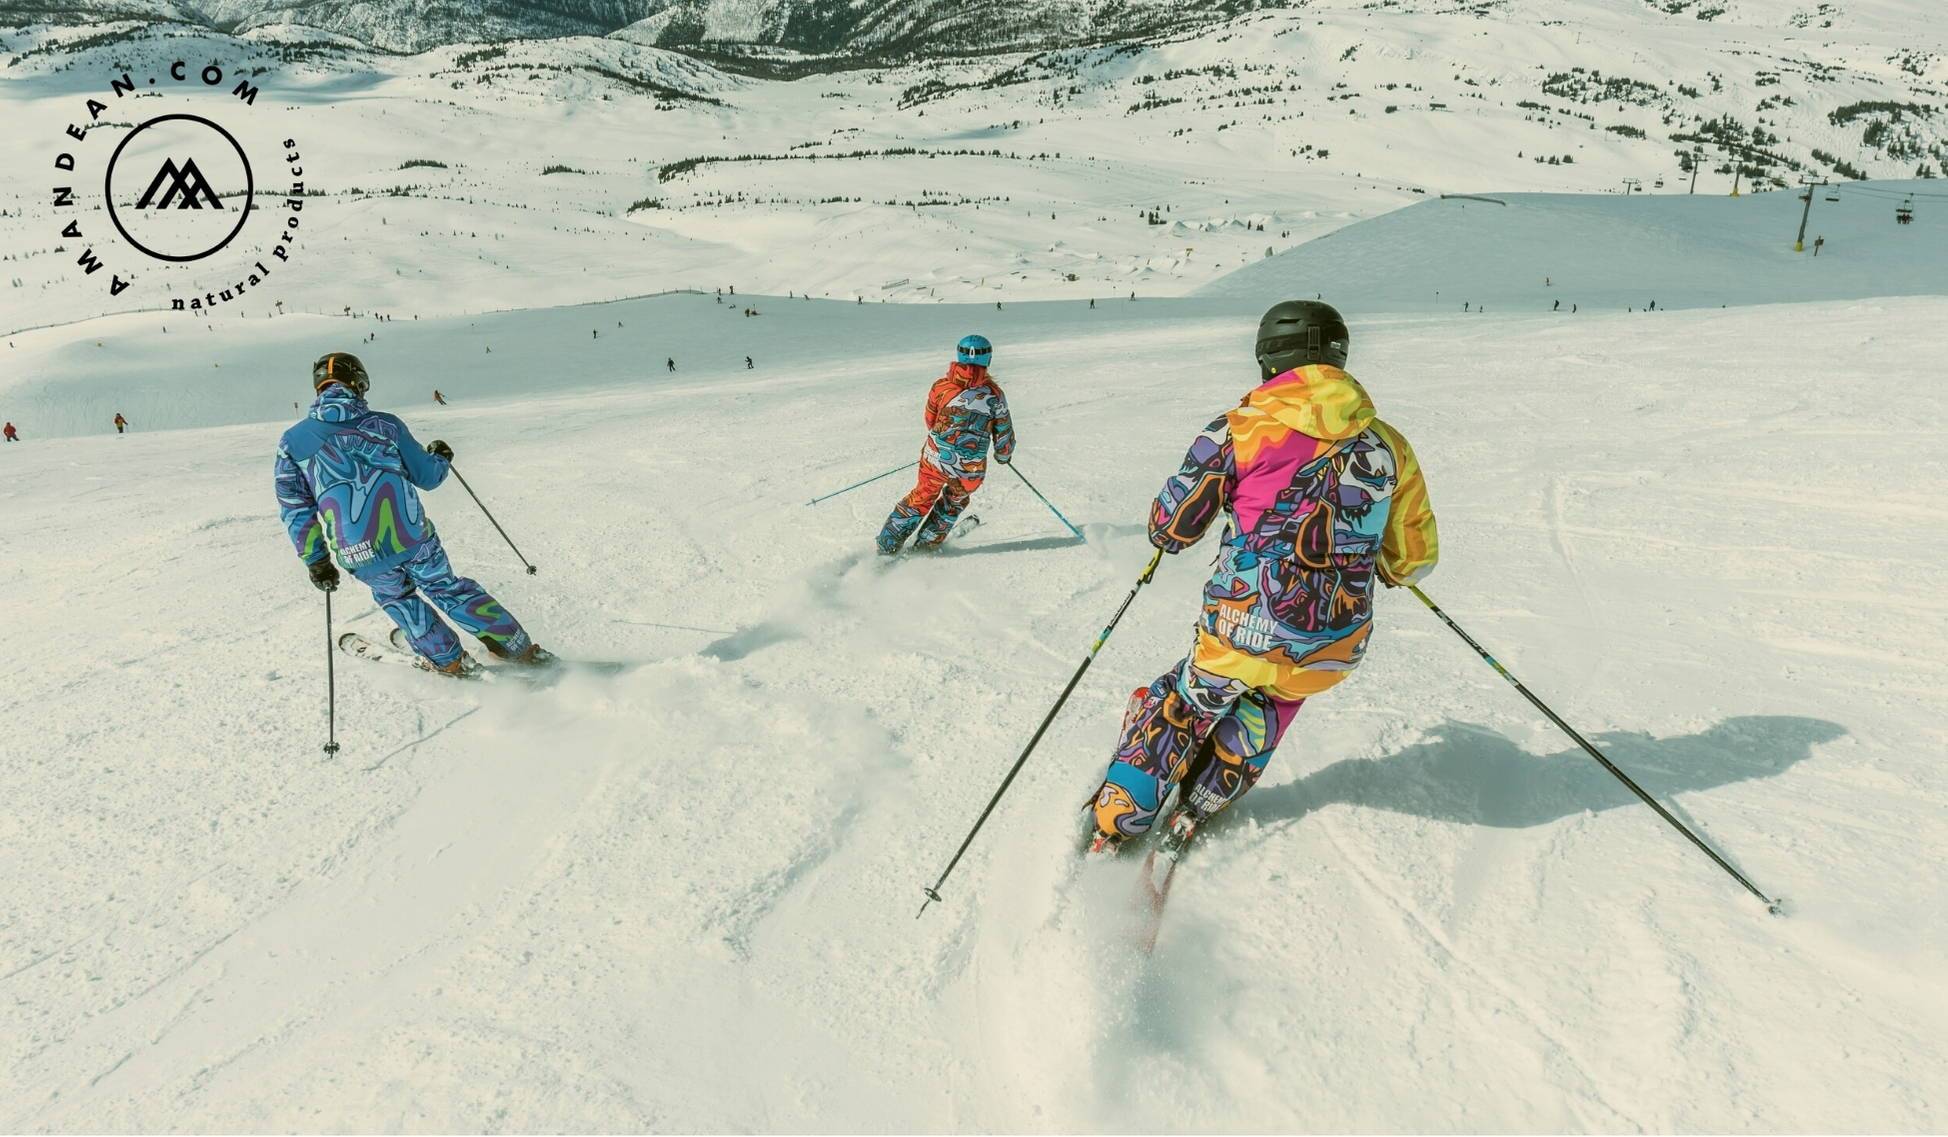 How to Strengthen Tendons & Ligaments for the Ski Season